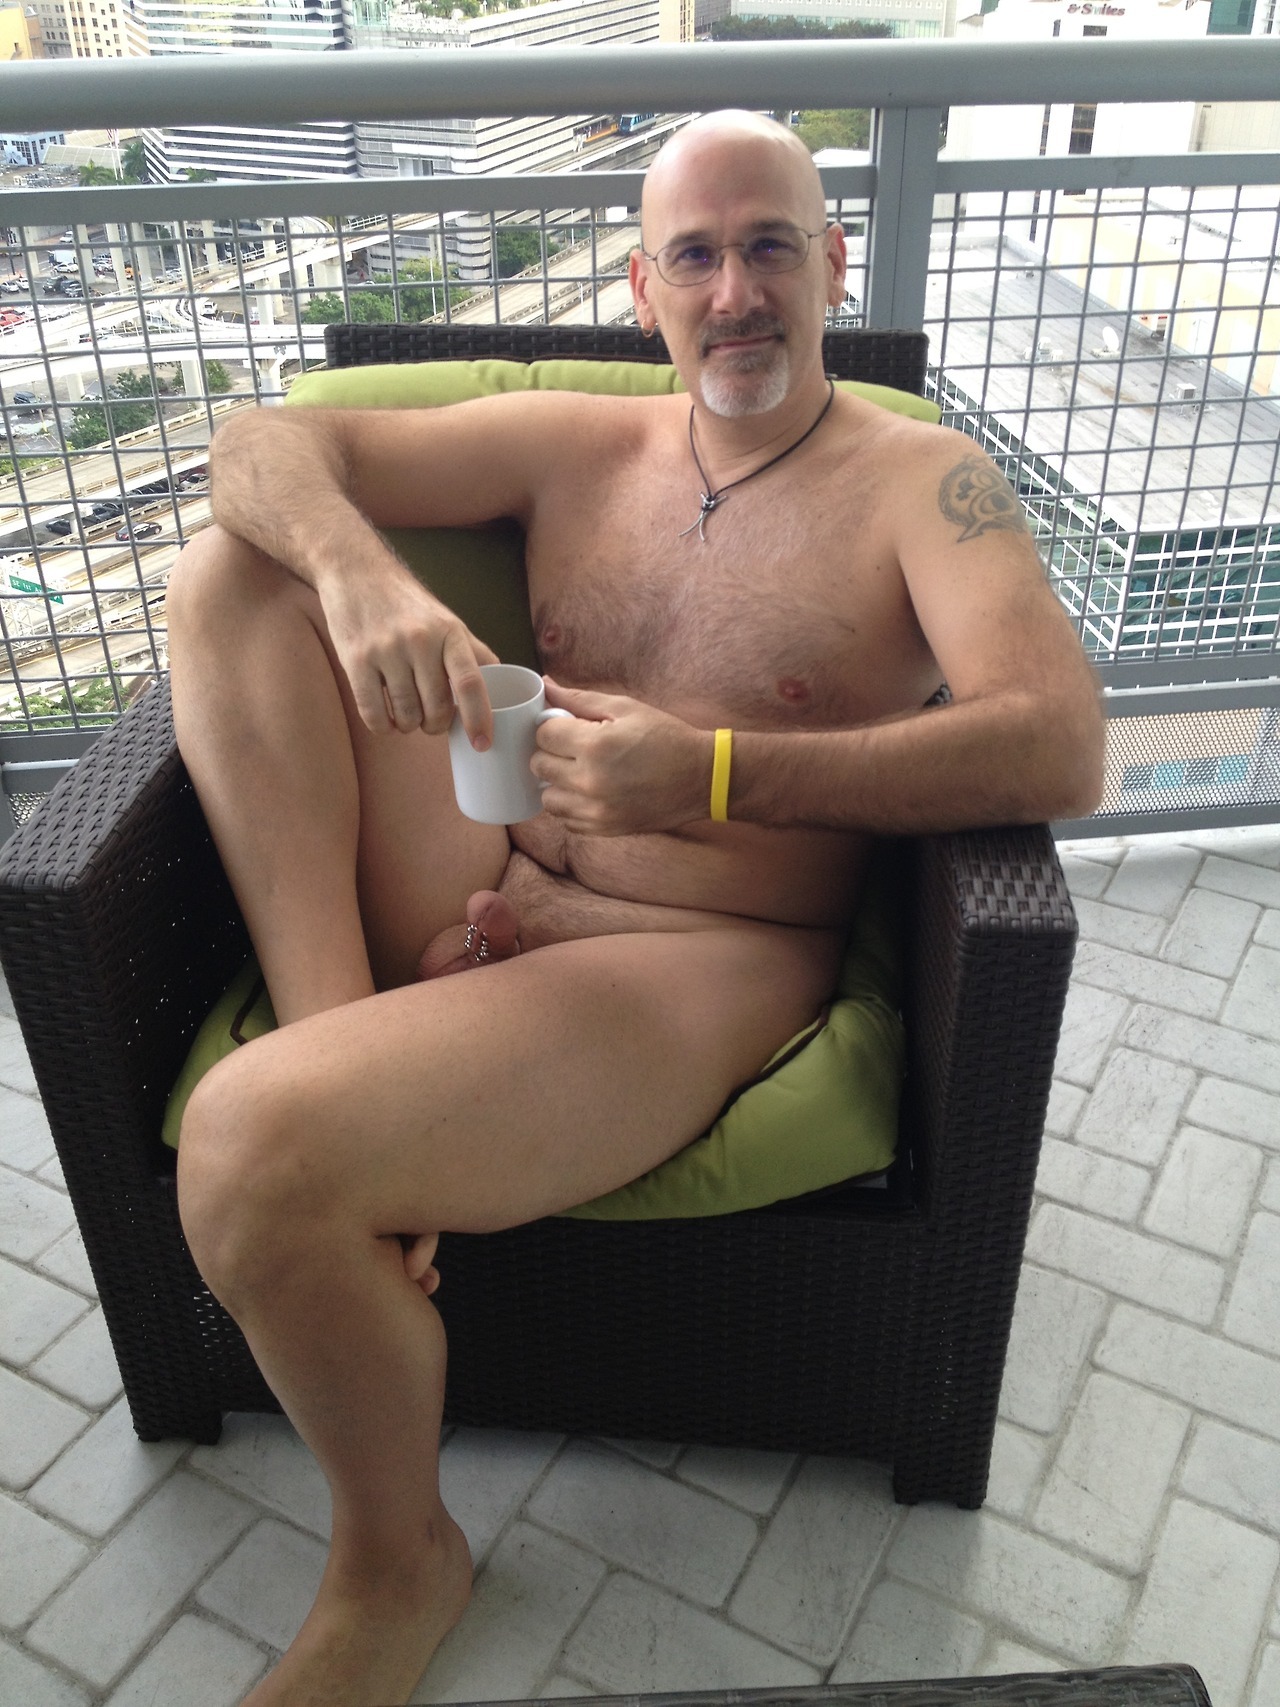 Lounging with coffee on a balcony.